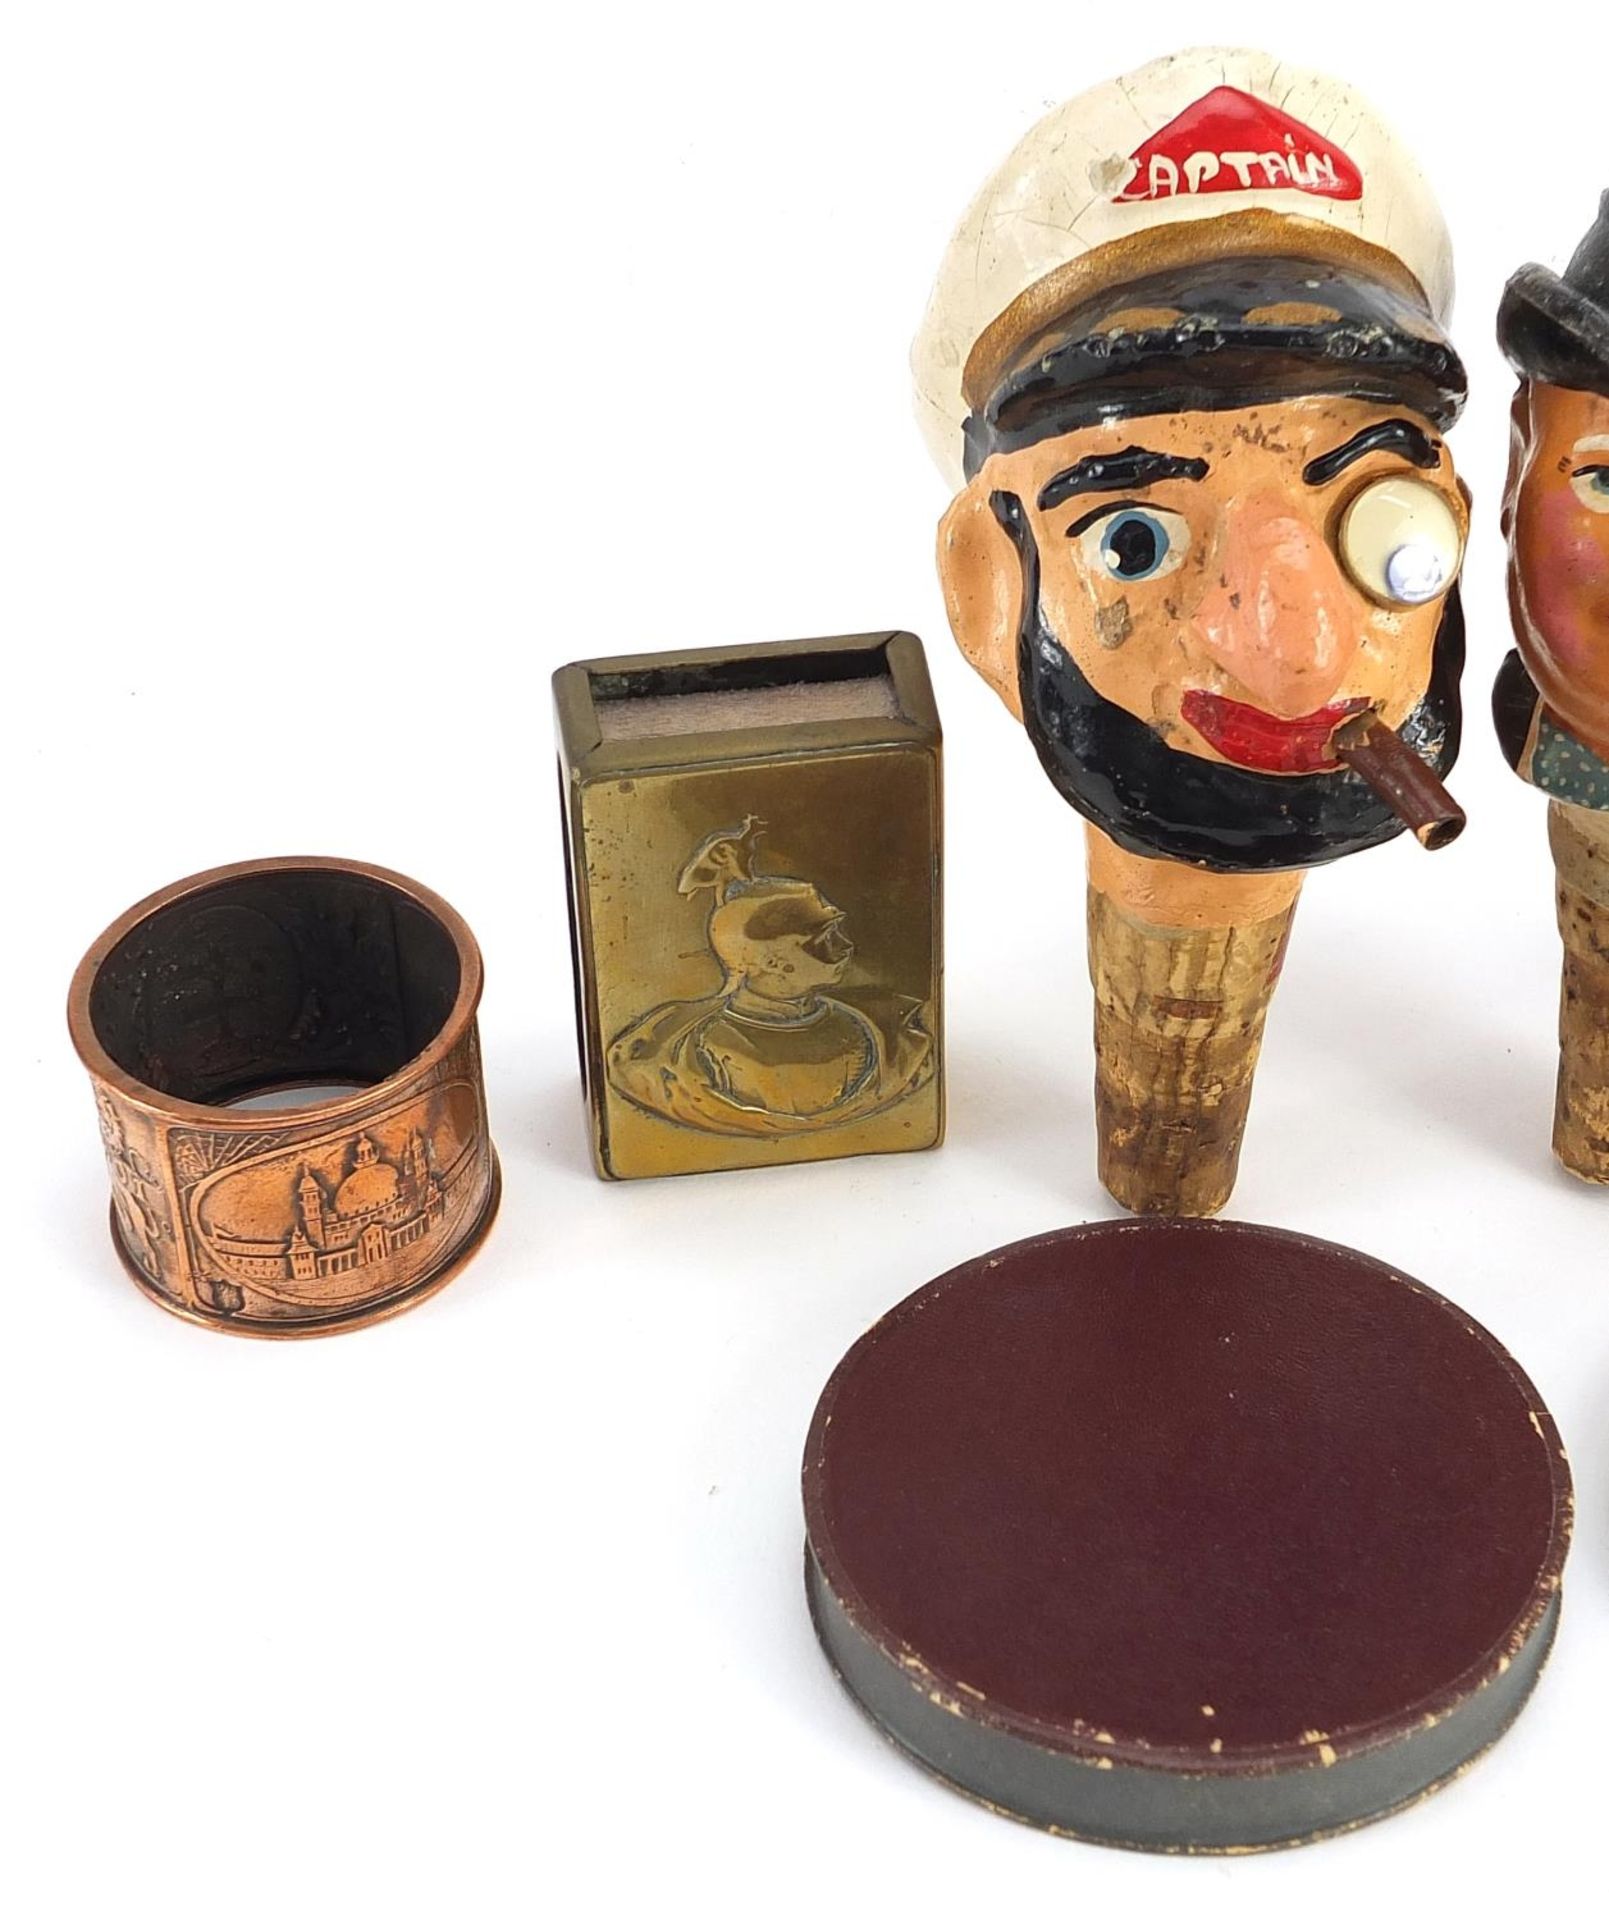 Political interest collectables including a Winston Churchill bronze medallion and painted bottles - Image 2 of 5